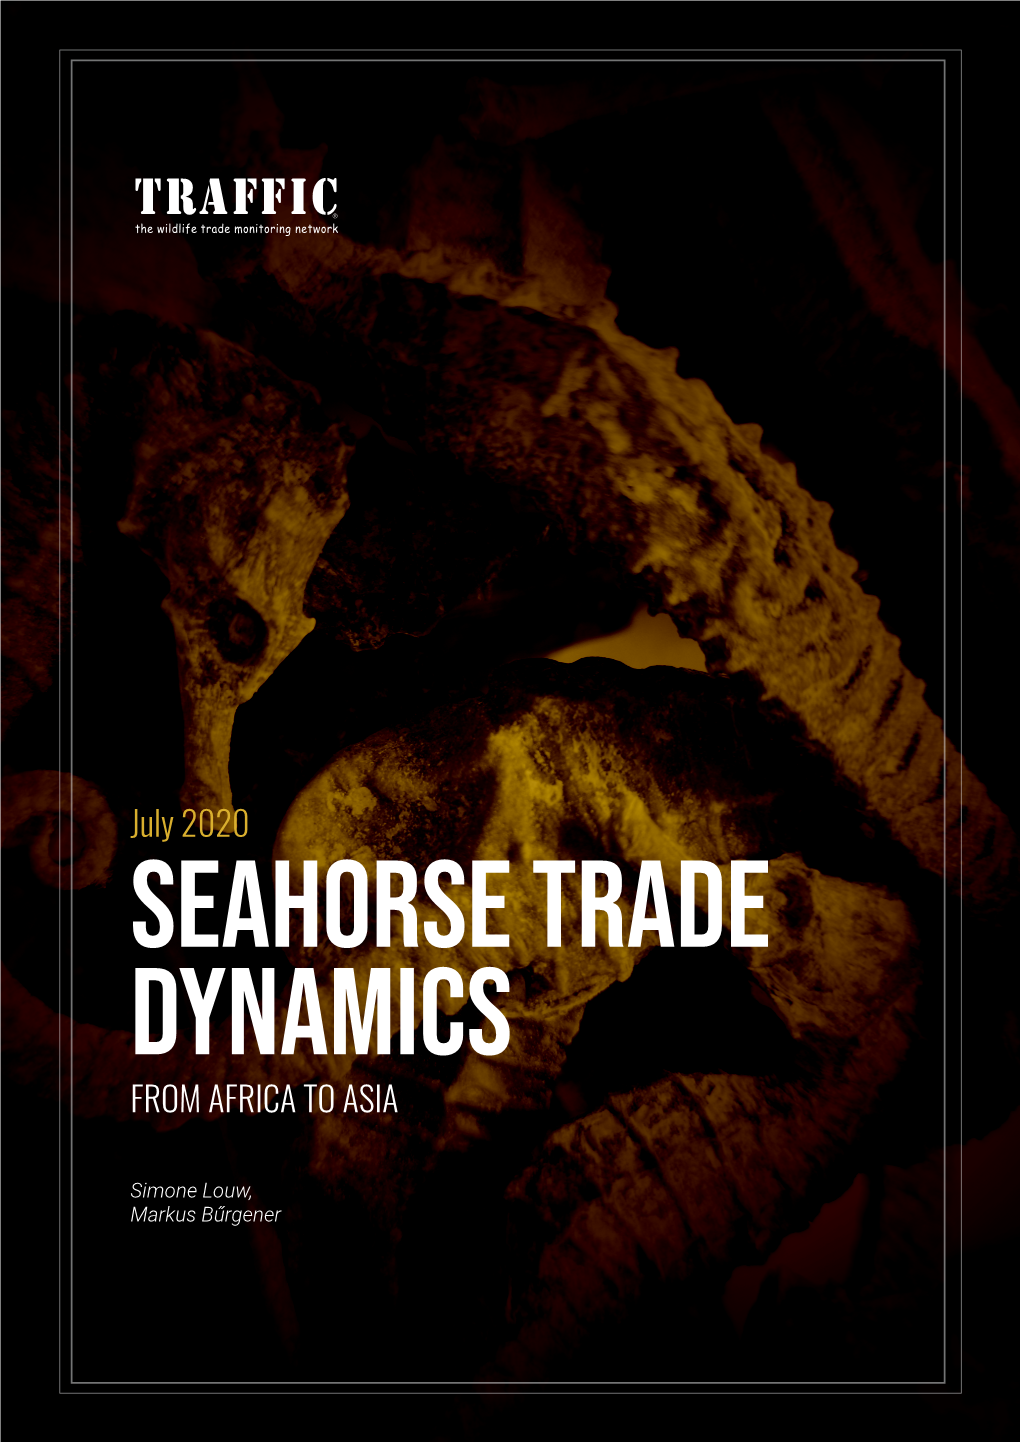 July 2020 SEAHORSE TRADE DYNAMICS from AFRICA to ASIA